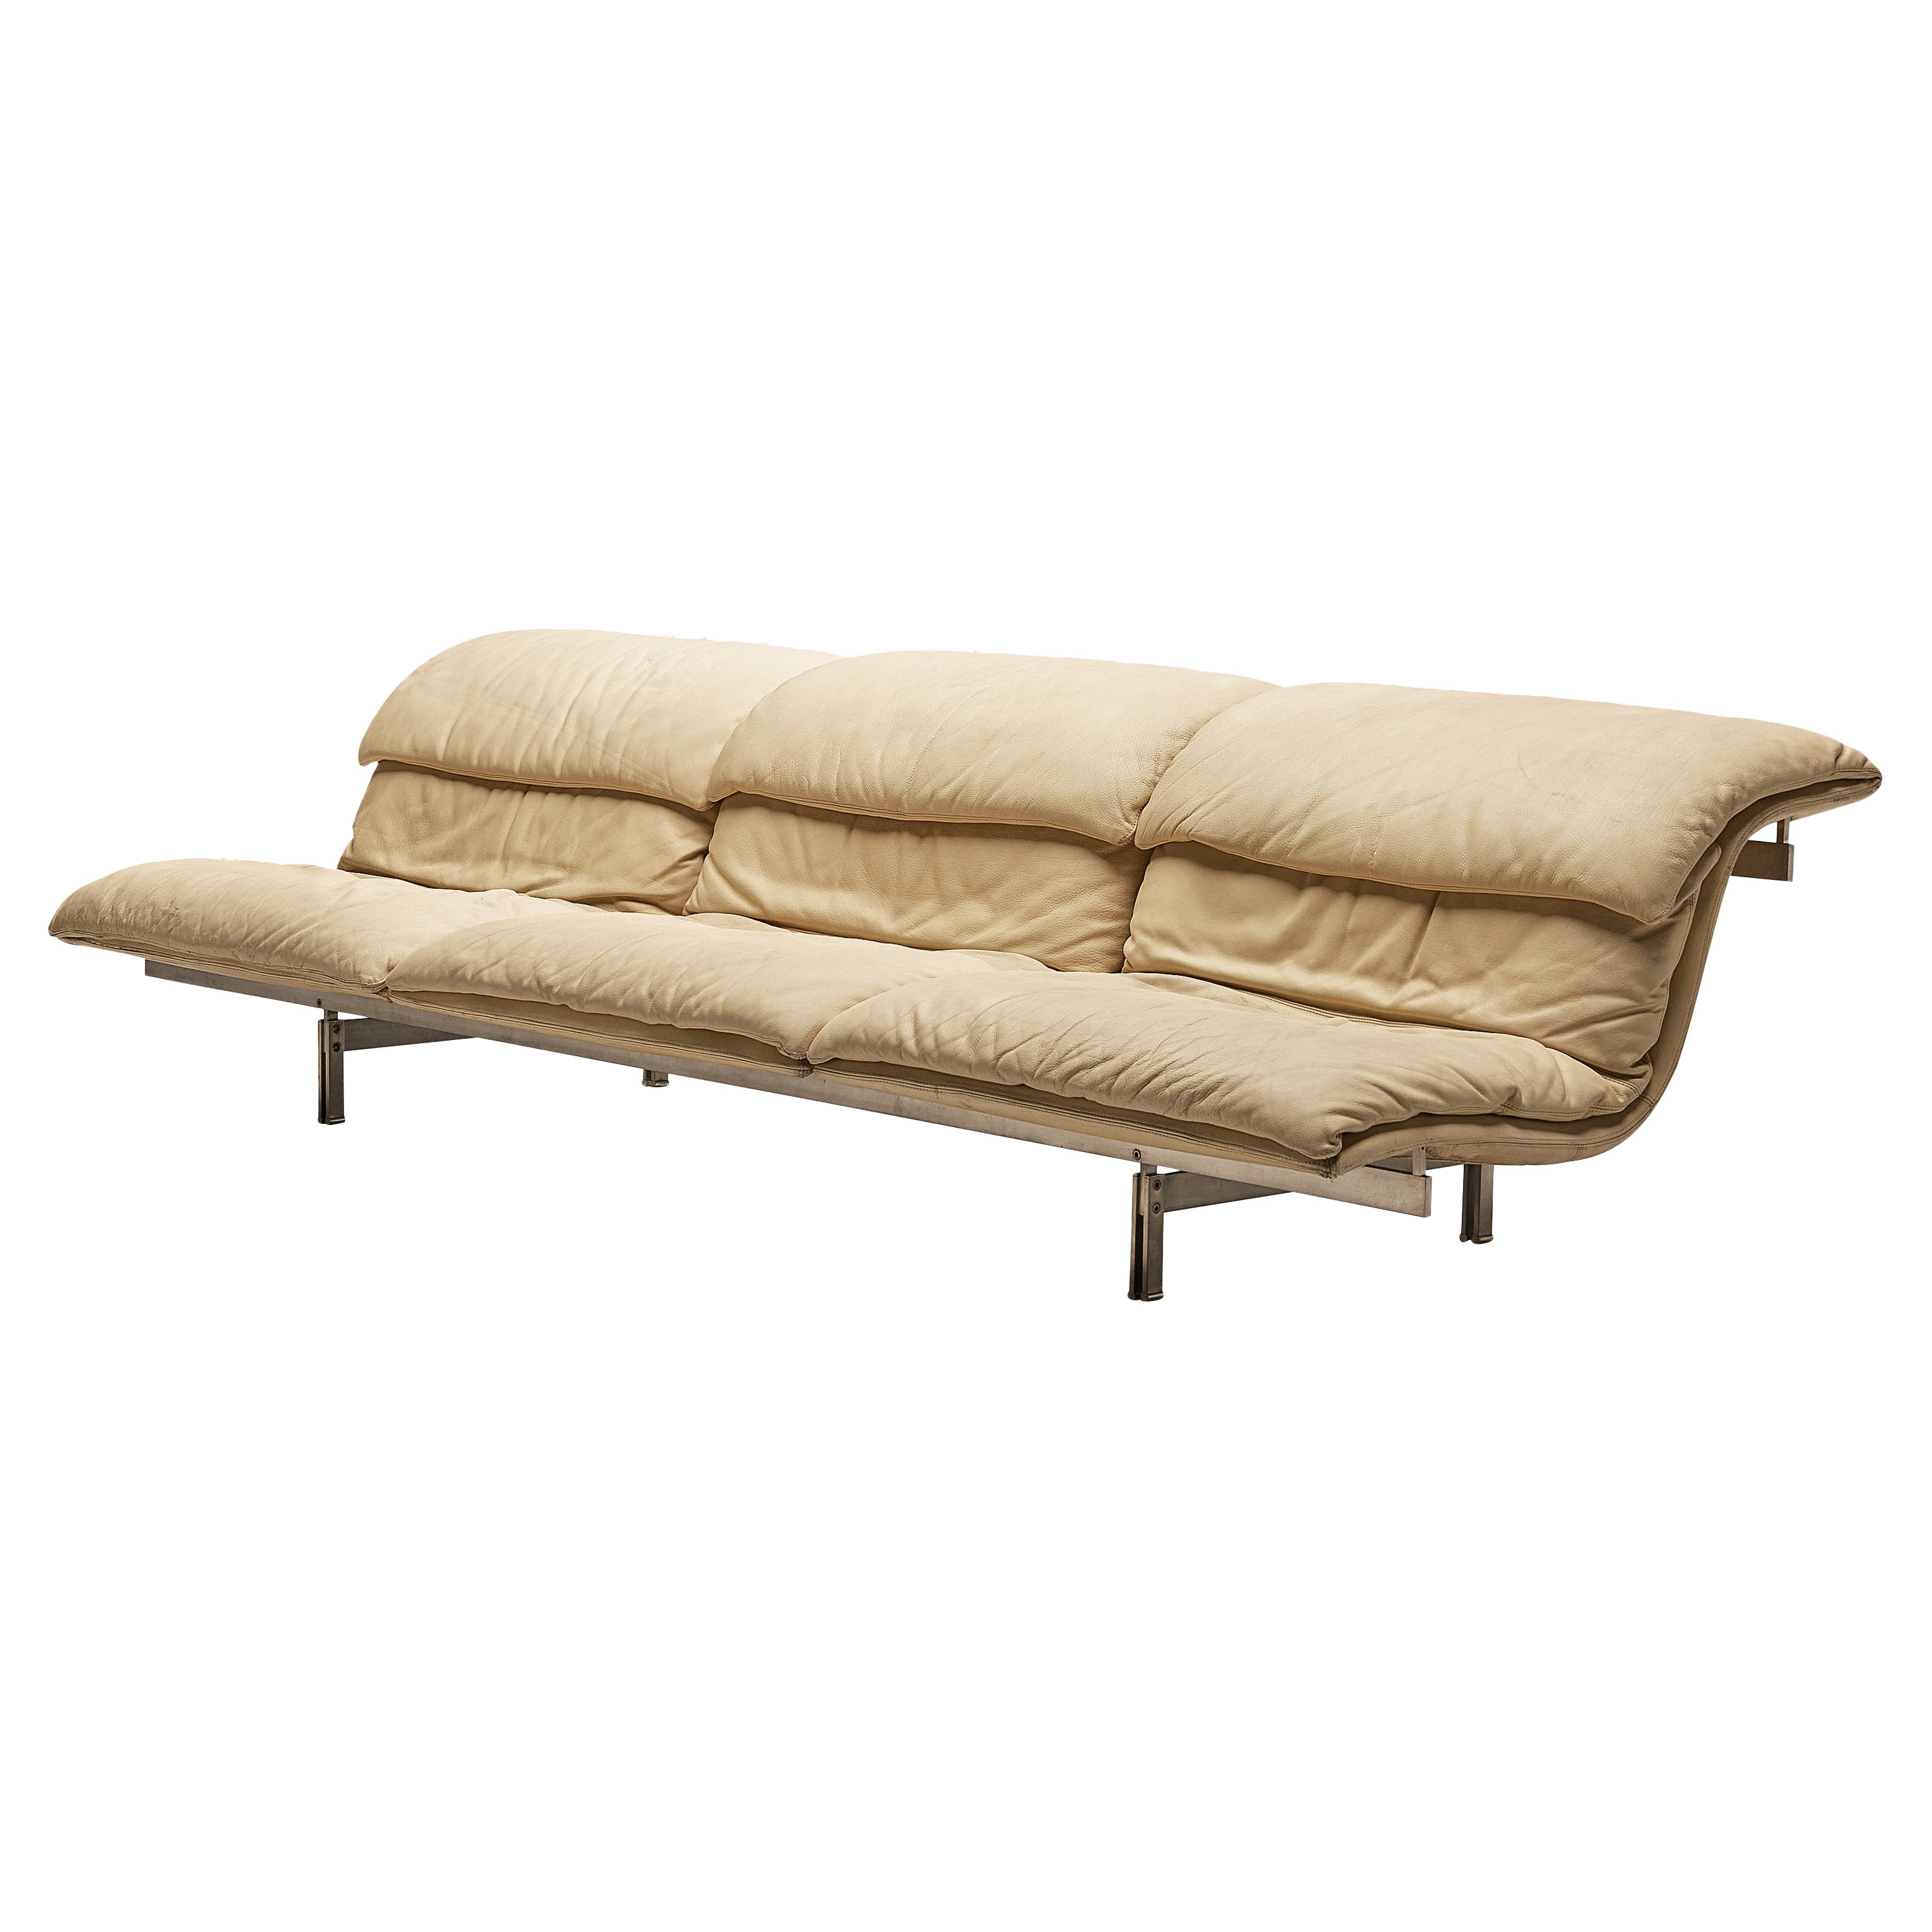 Giovanni Offredi for Saporit 'Wave' Sofa in Beige Leather For Sale